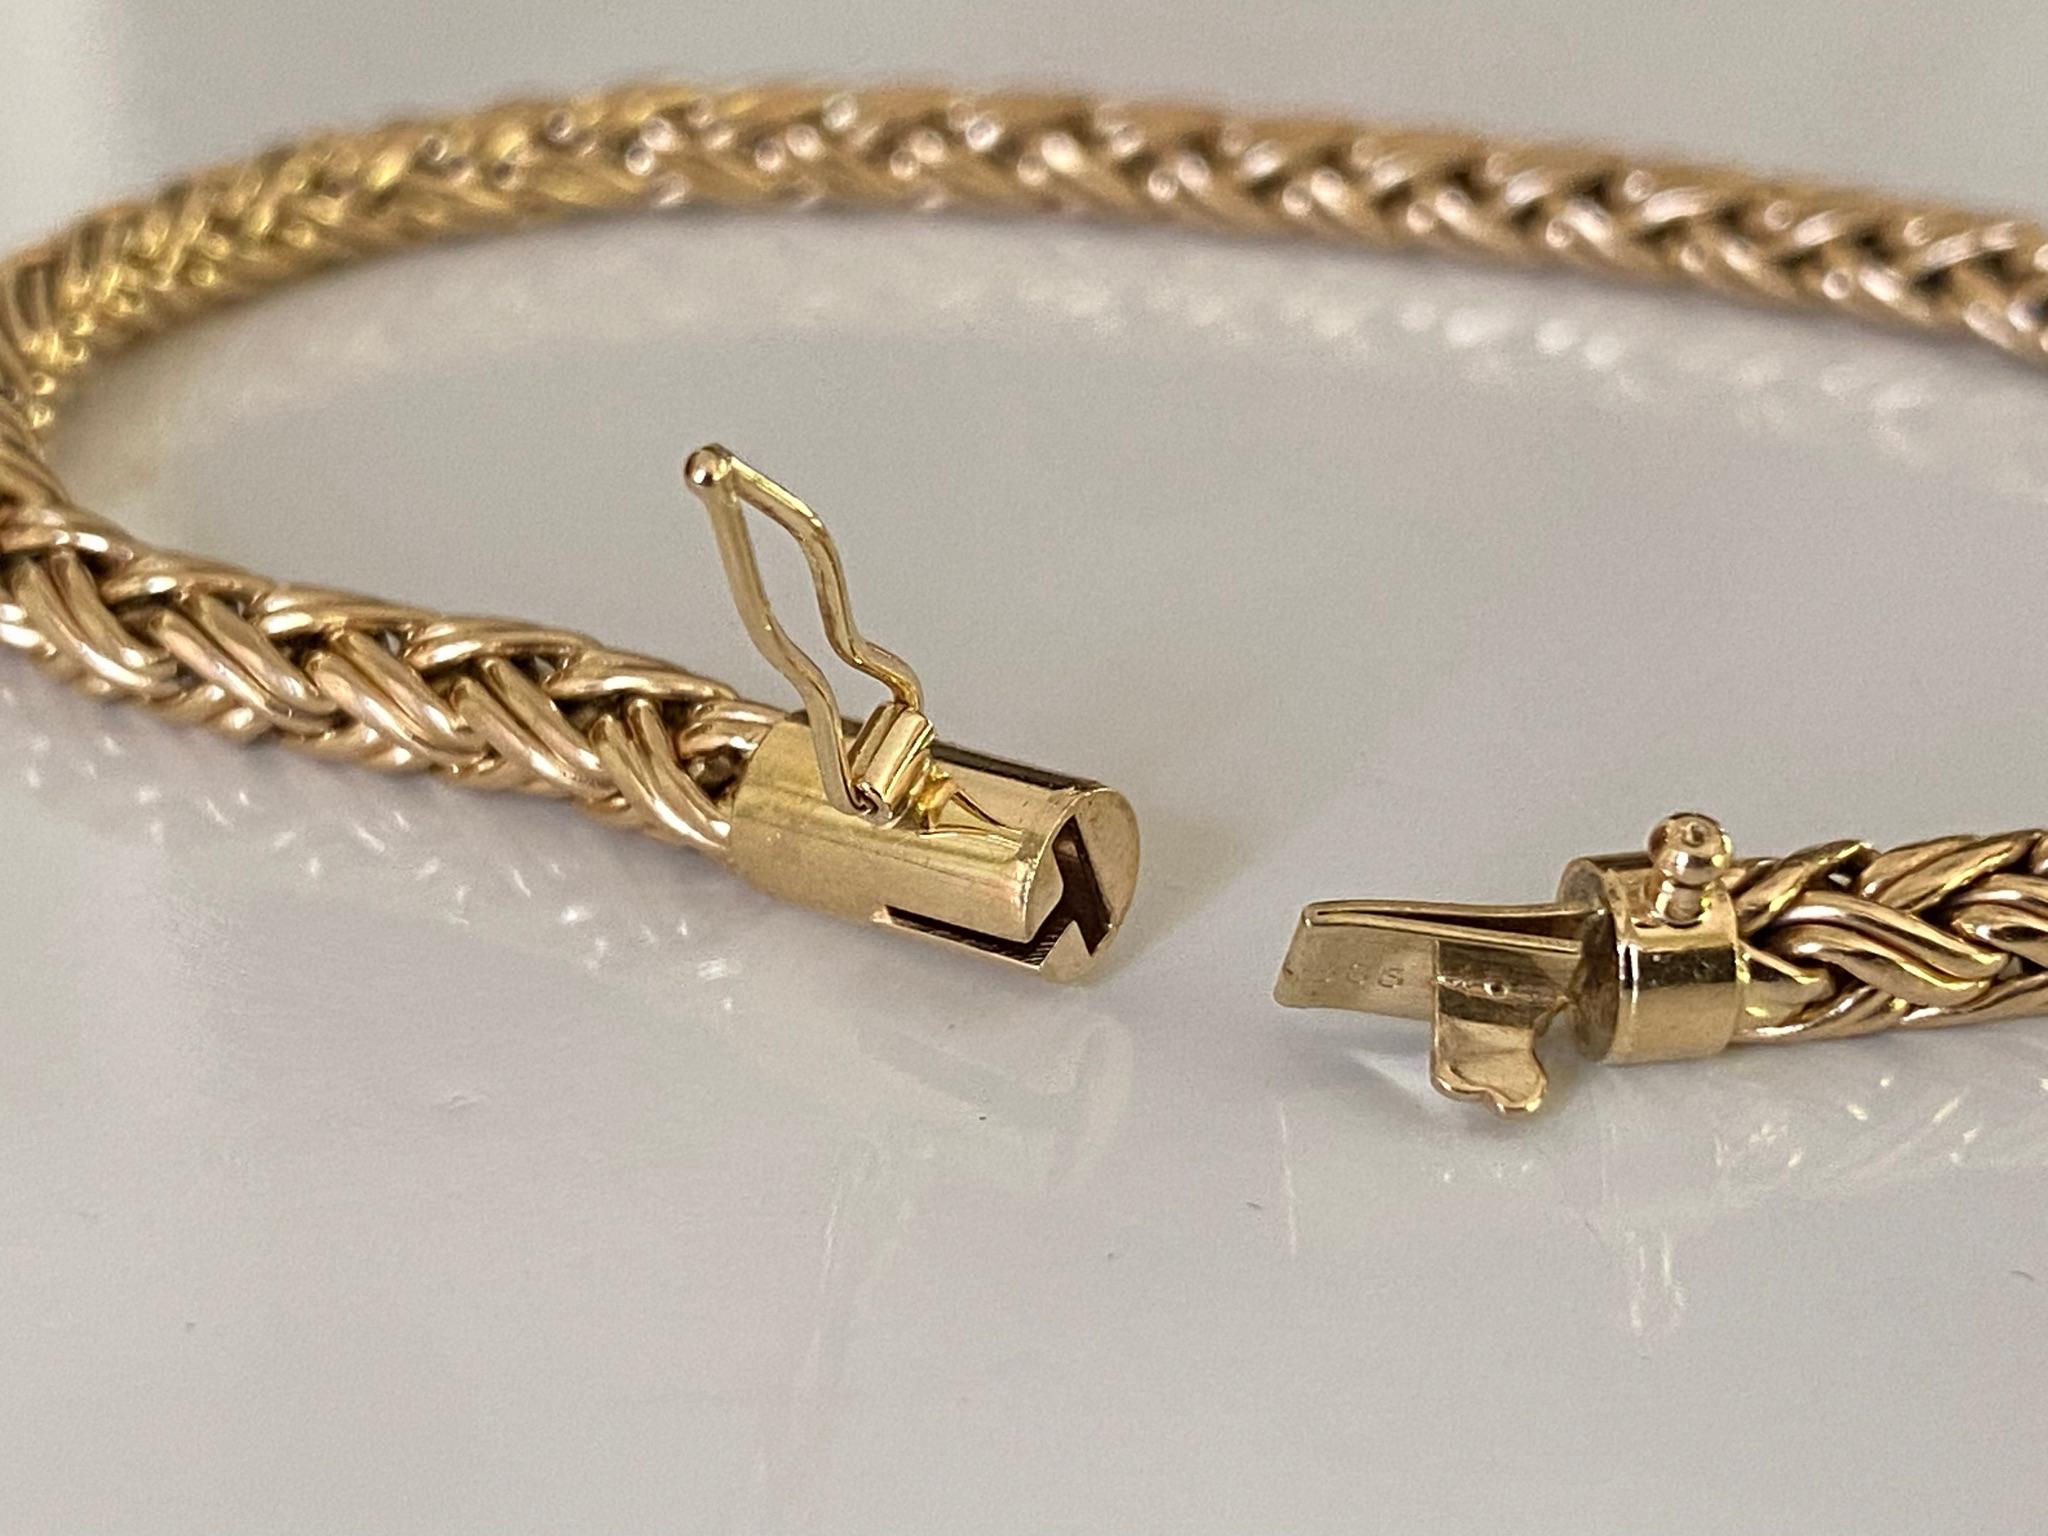 This classic vintage Tiffany & Co rope bracelet crafted in 14kt yellow gold measures 7.3 inches long and approximately 4mm thick. Stamped Tiffany & Co
